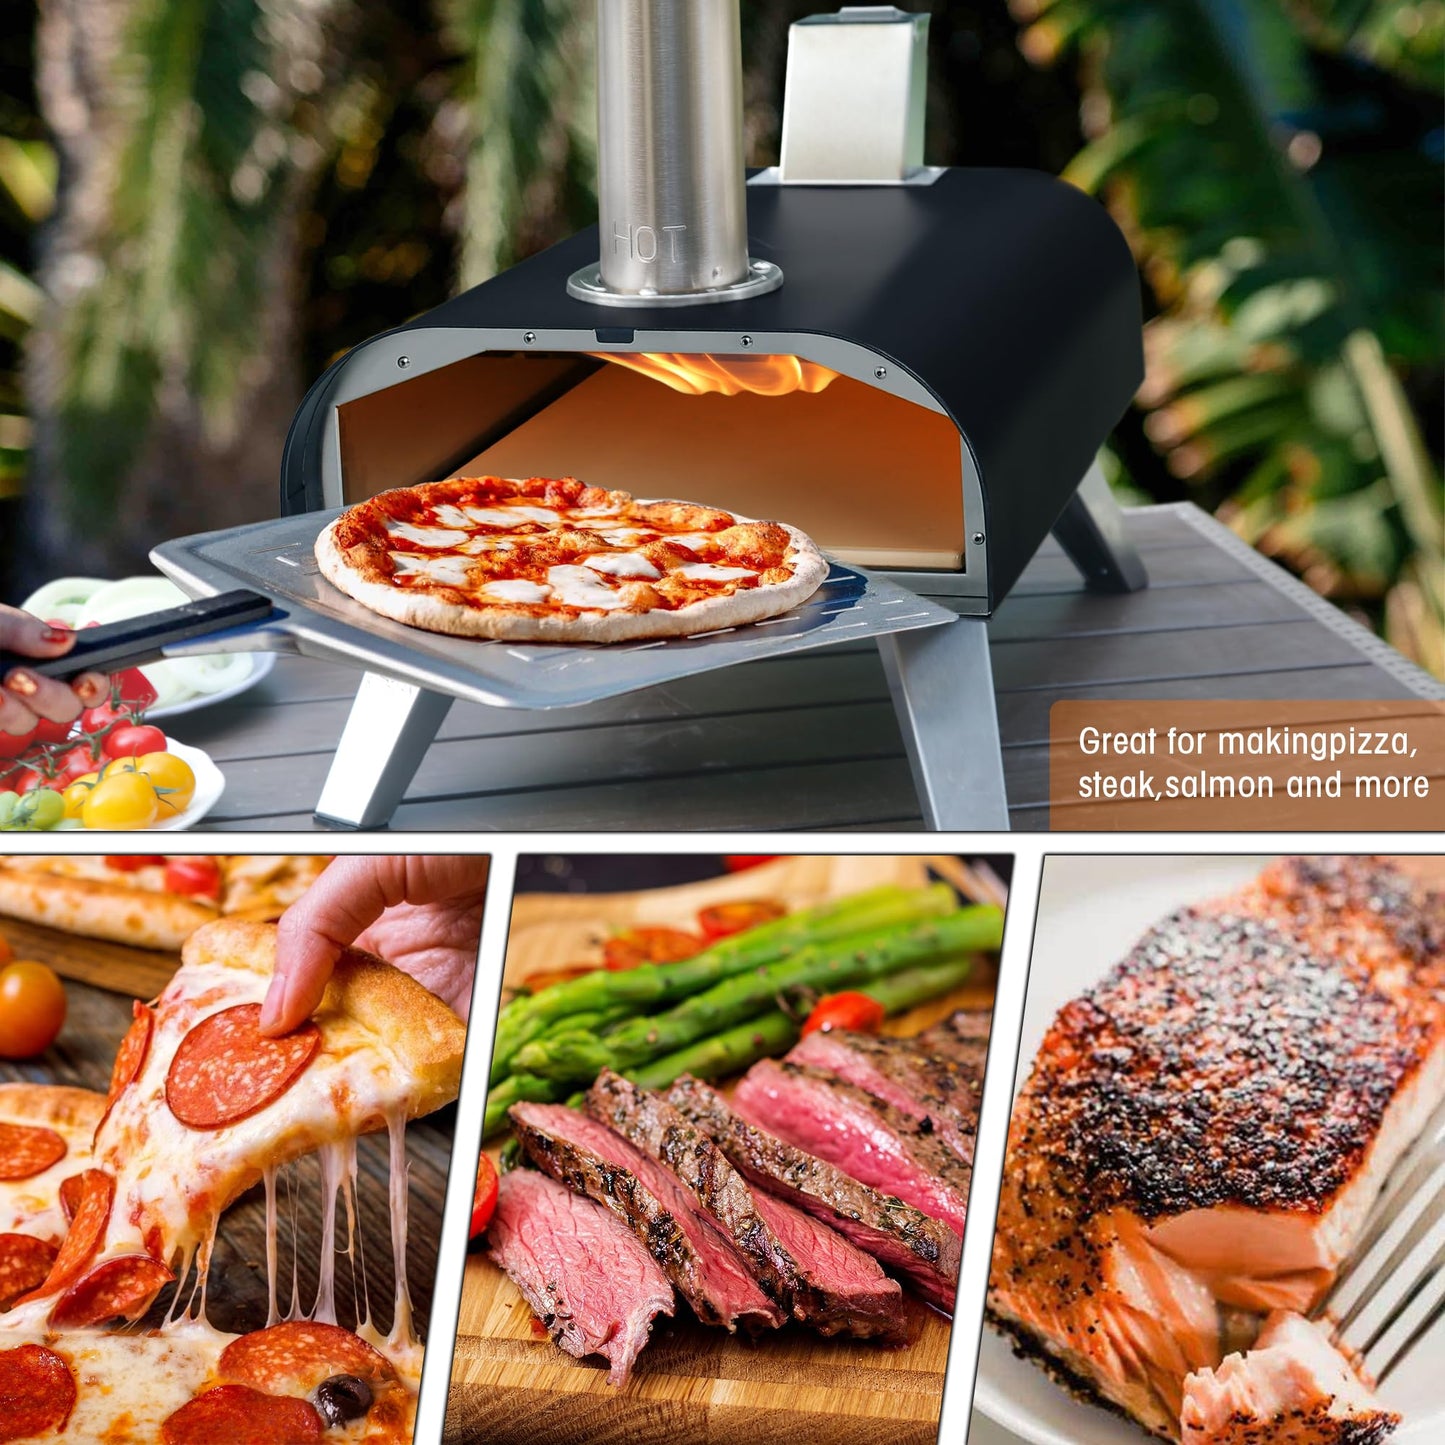 BIG HORN OUTDOORS 12" Black Pizza Ovens Wood Pellet Fired Pizza Maker, Stone-Baked Pizzas Made Easy Use Anywhere